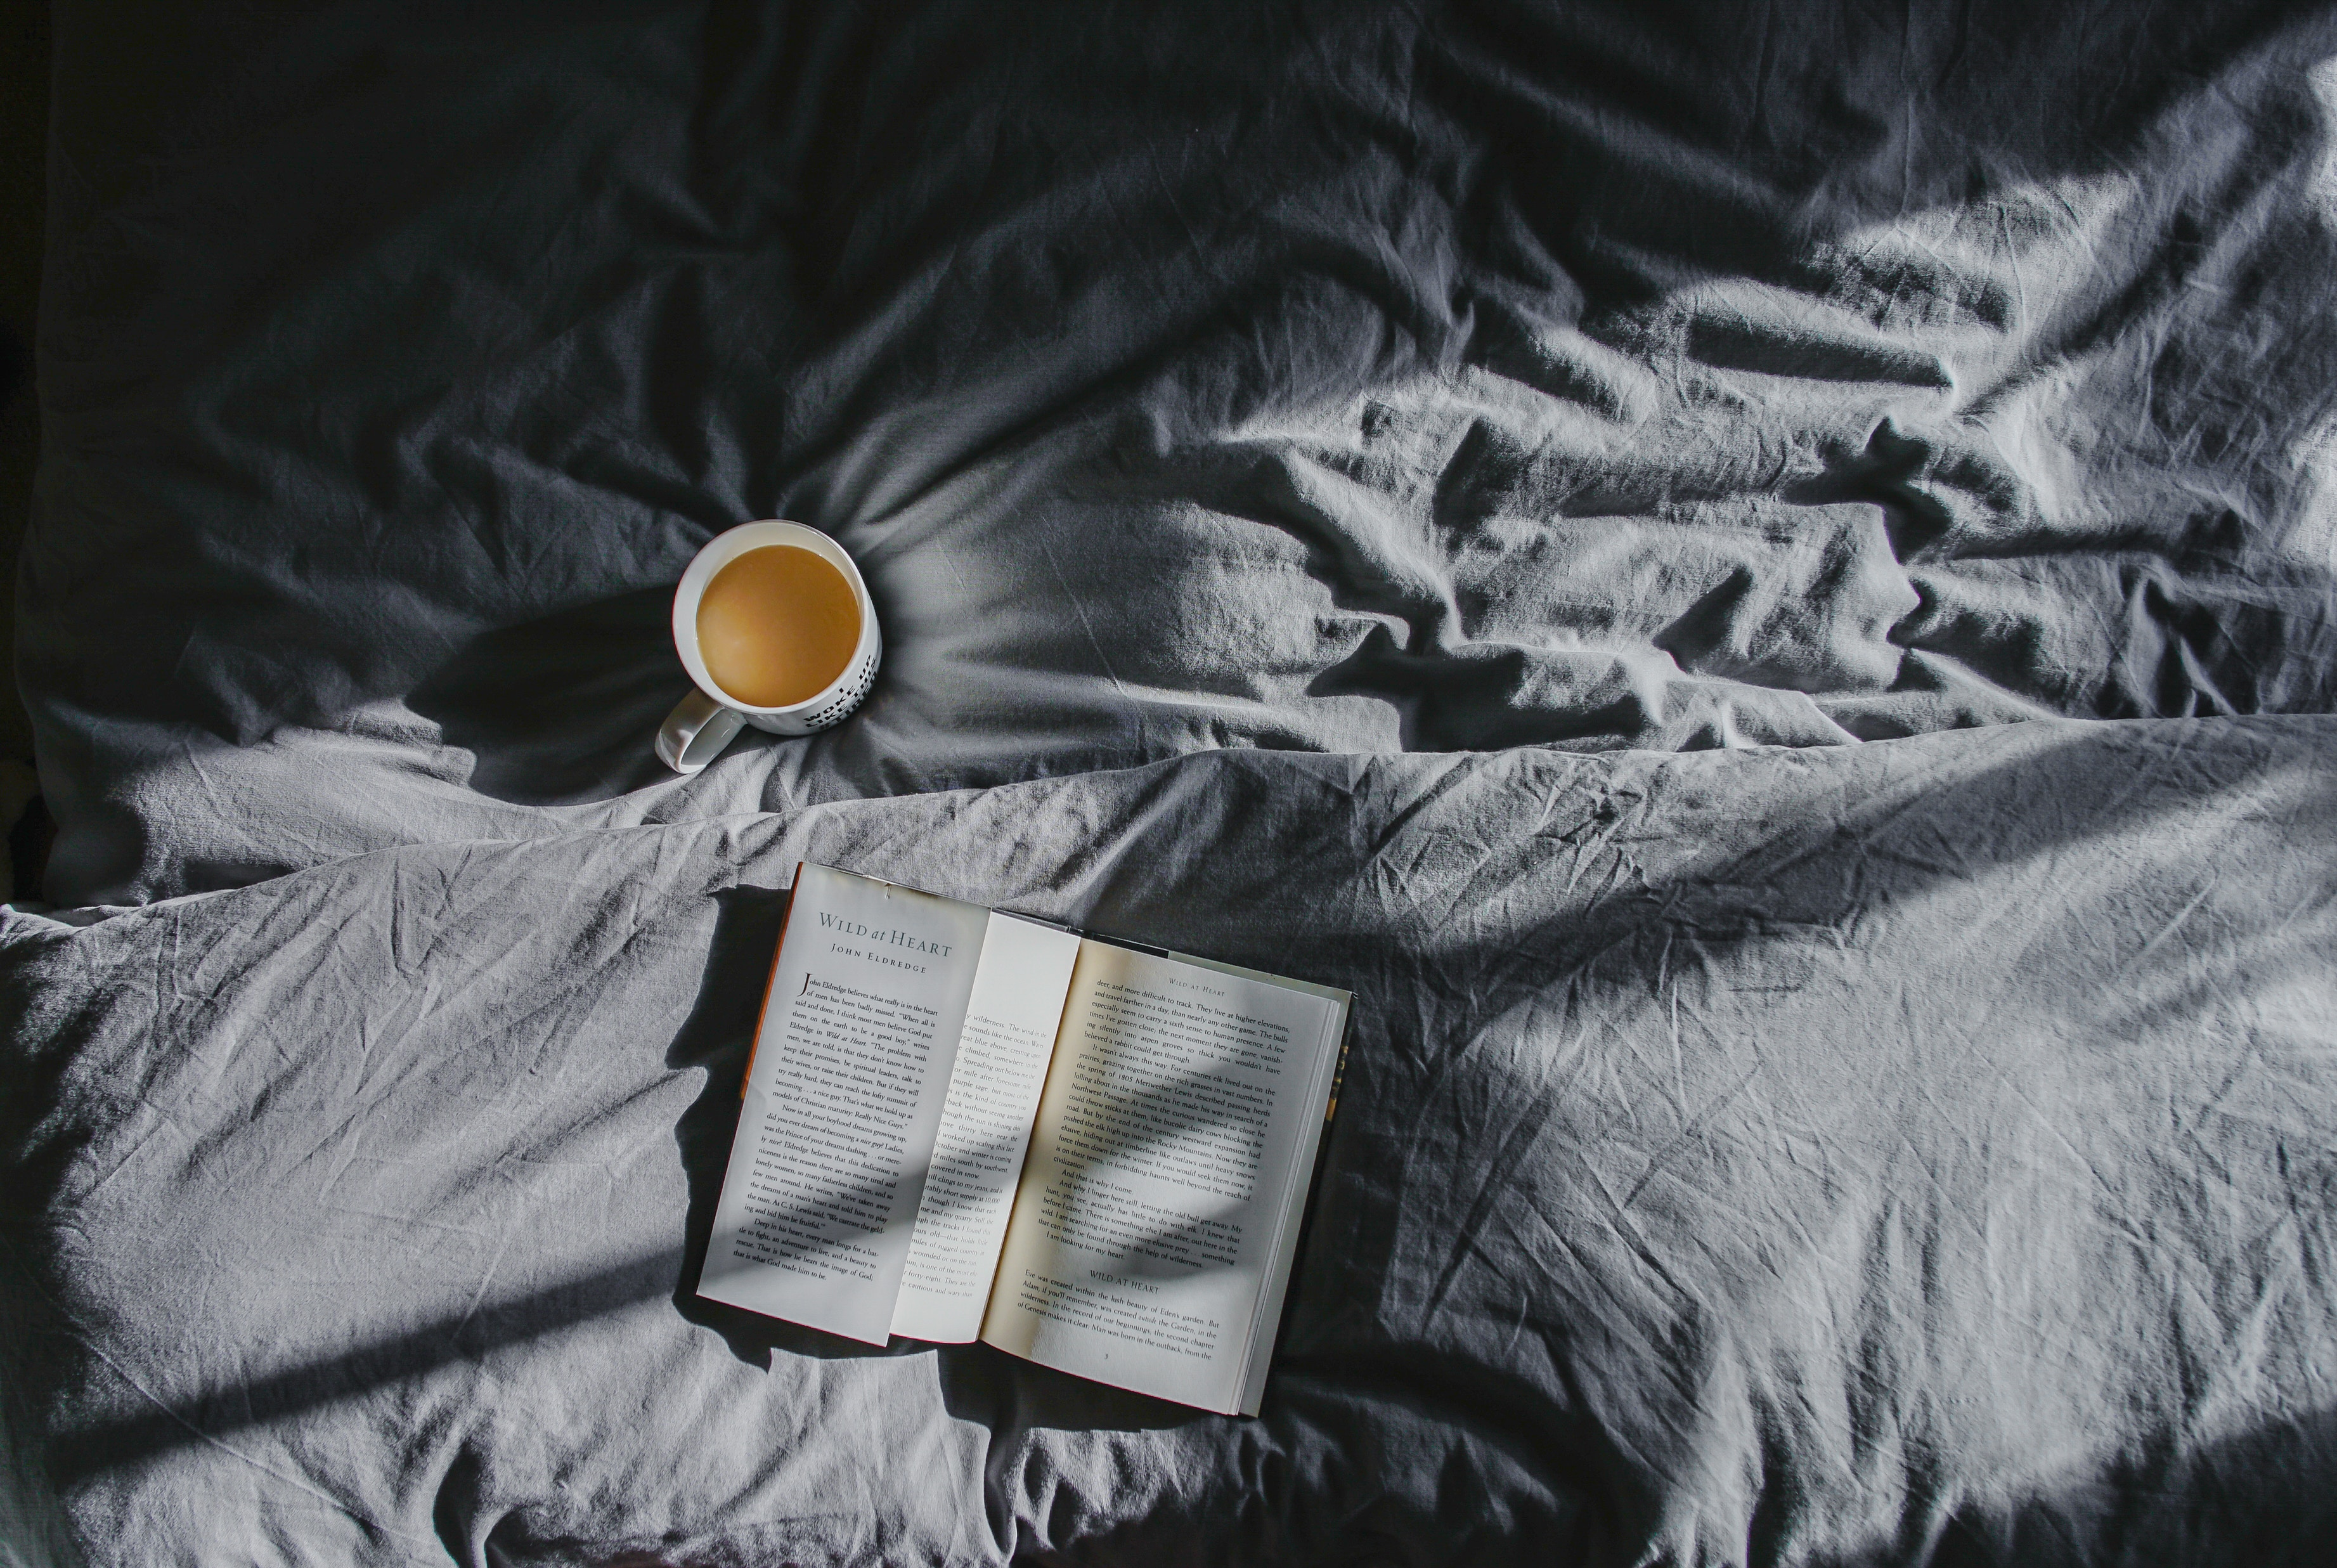 coffee, miscellaneous, miscellanea, shadow, book, bed for android